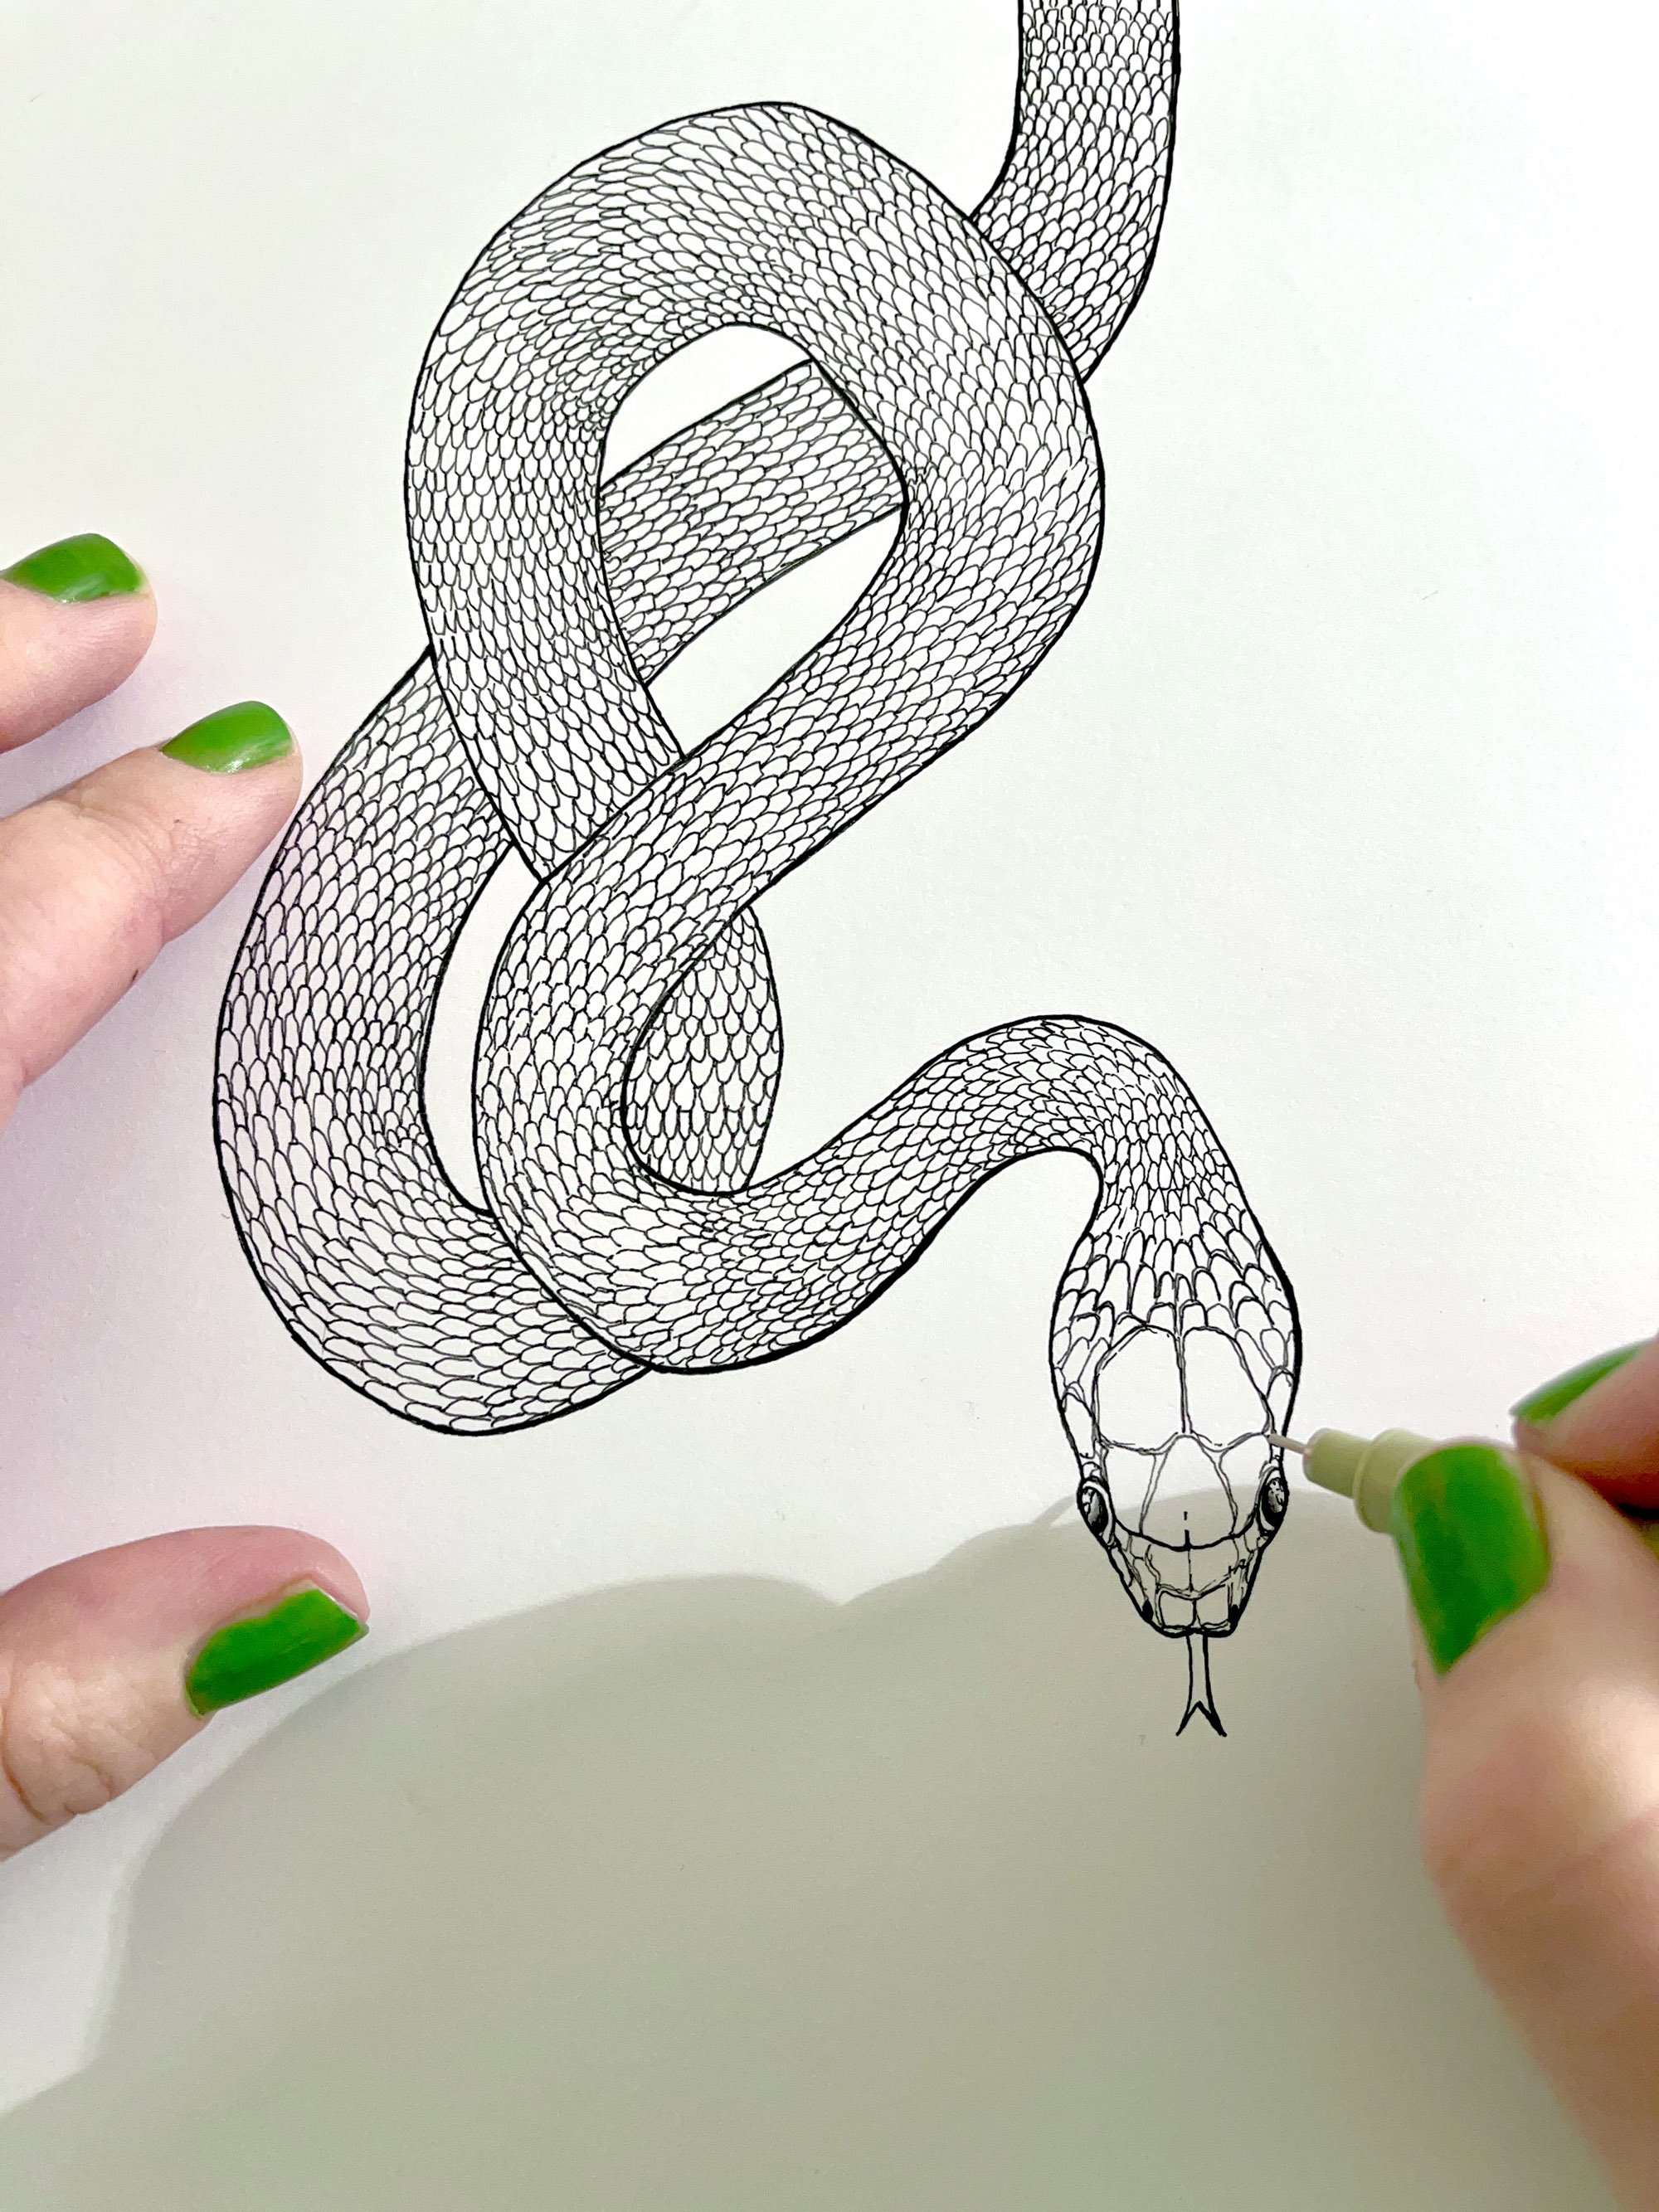 Pen Drawing of a Serpent 